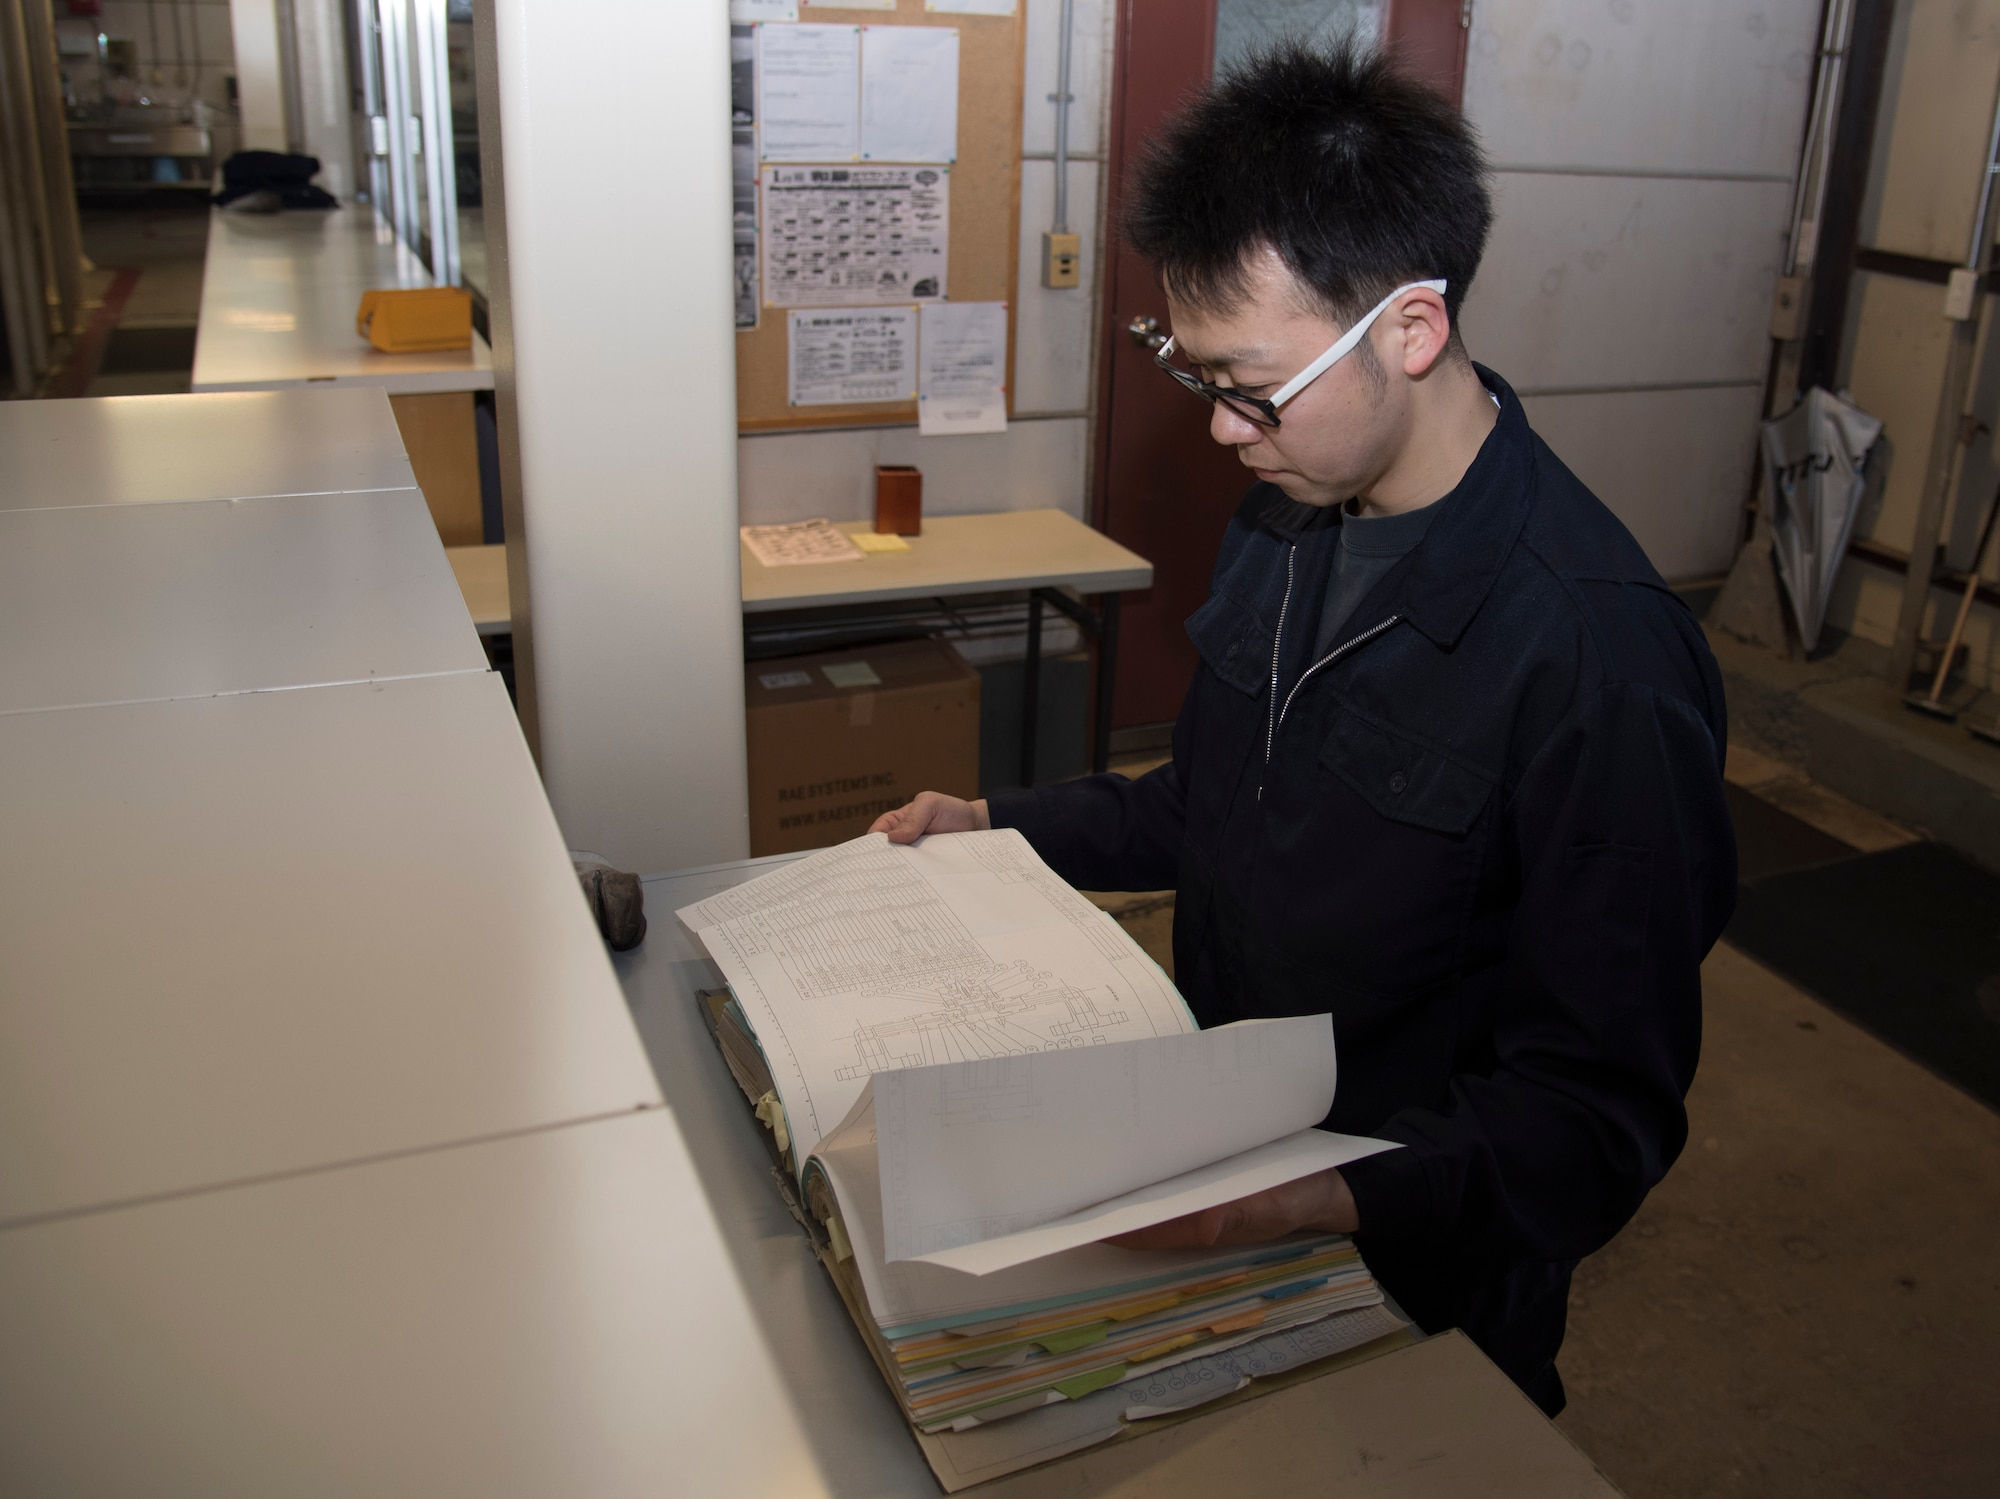 Shingo Matsumura, a 35th Civil Engineer Squadron boiler operator, looks through a steam plant maintenance book at Misawa Air Base, Japan, Jan. 30, 2017. The maintenance book includes blueprints for the boiler rooms and instructions for performing all maintenance checks. Misawa contains 11 different steam plant locations across the base. (U.S. Air Force photo by Airman 1st Class Sadie Colbert)